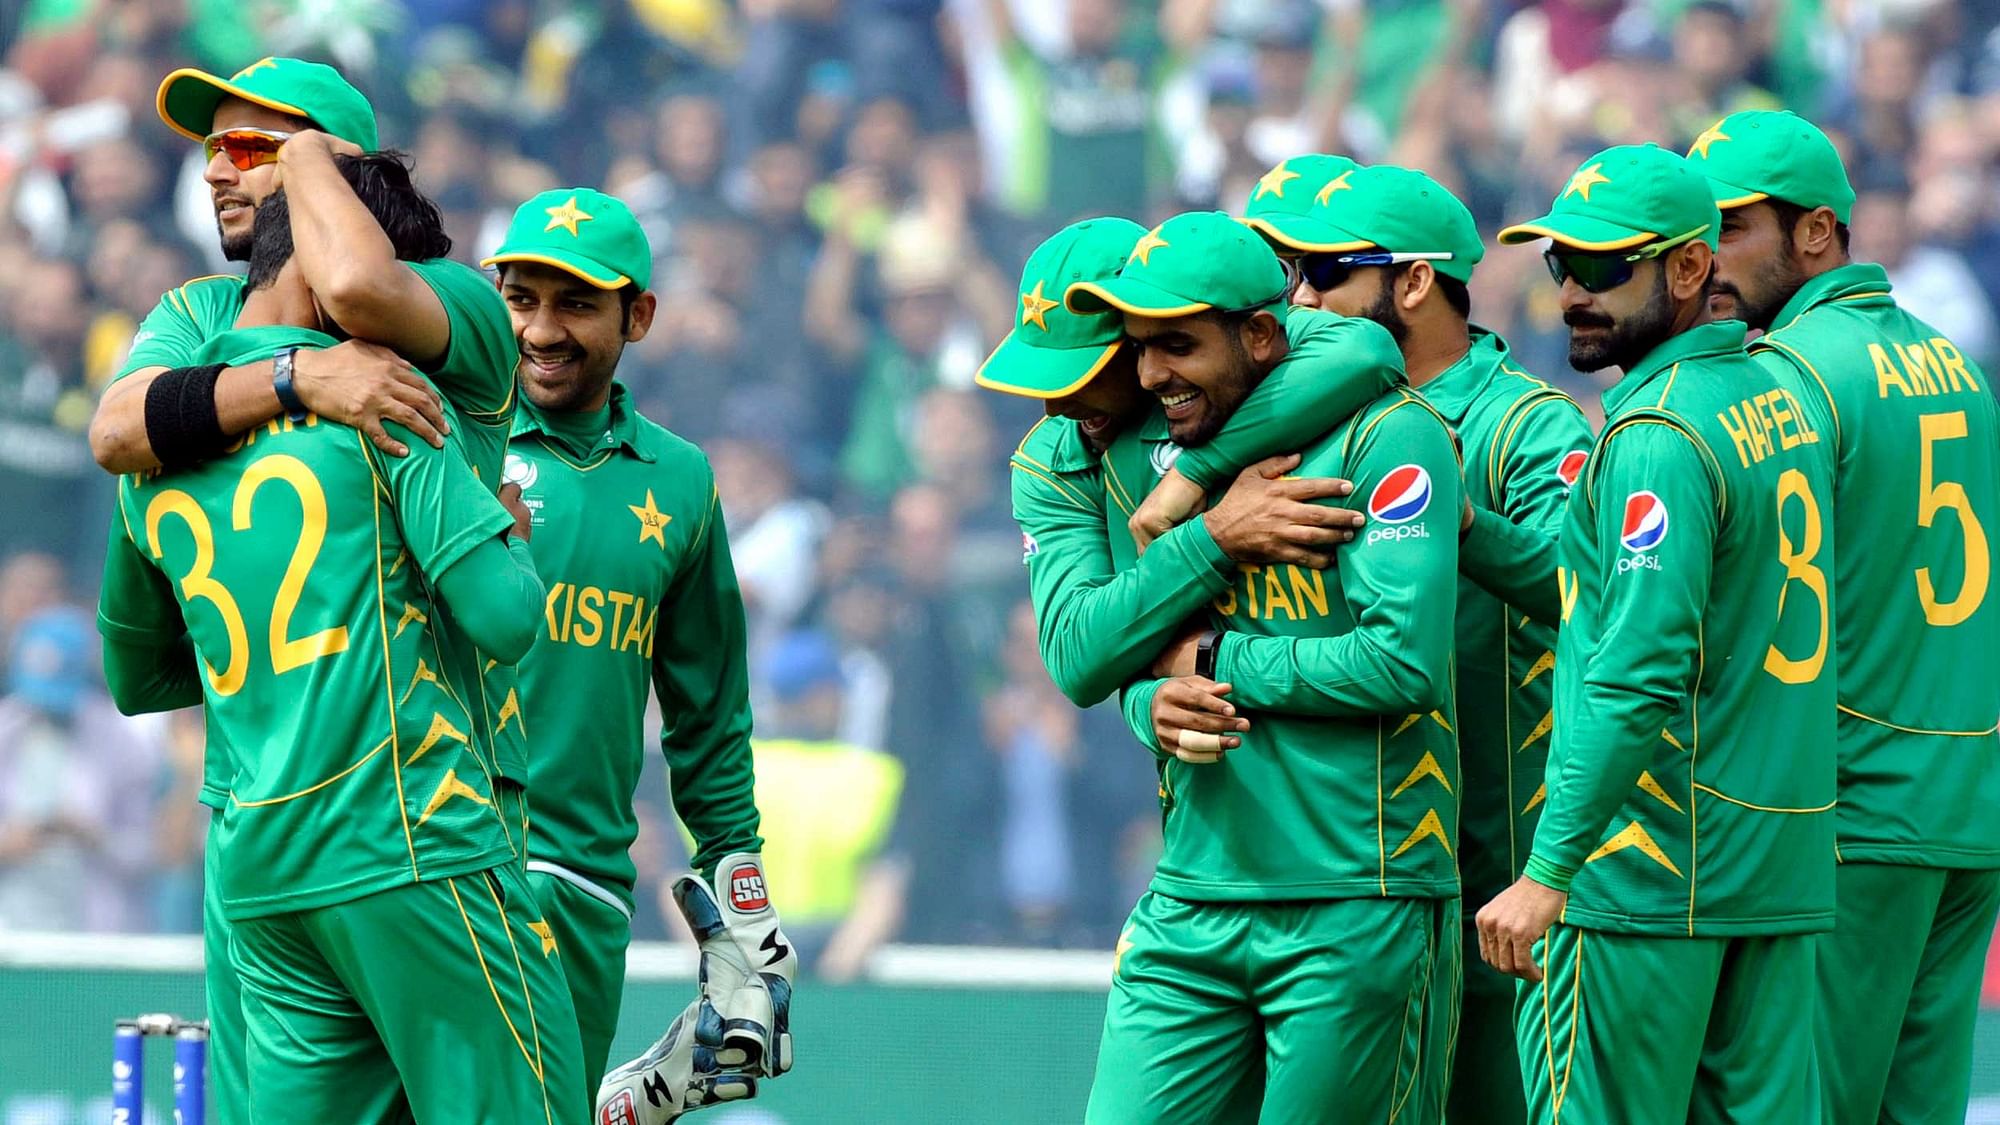 Pakistan players will now be able to take part in a maximum of three ICC approved leagues in a year, excluding the Pakistan Super League, Pakistan Cricket Board (PCB) said on Tuesday, 4 February.